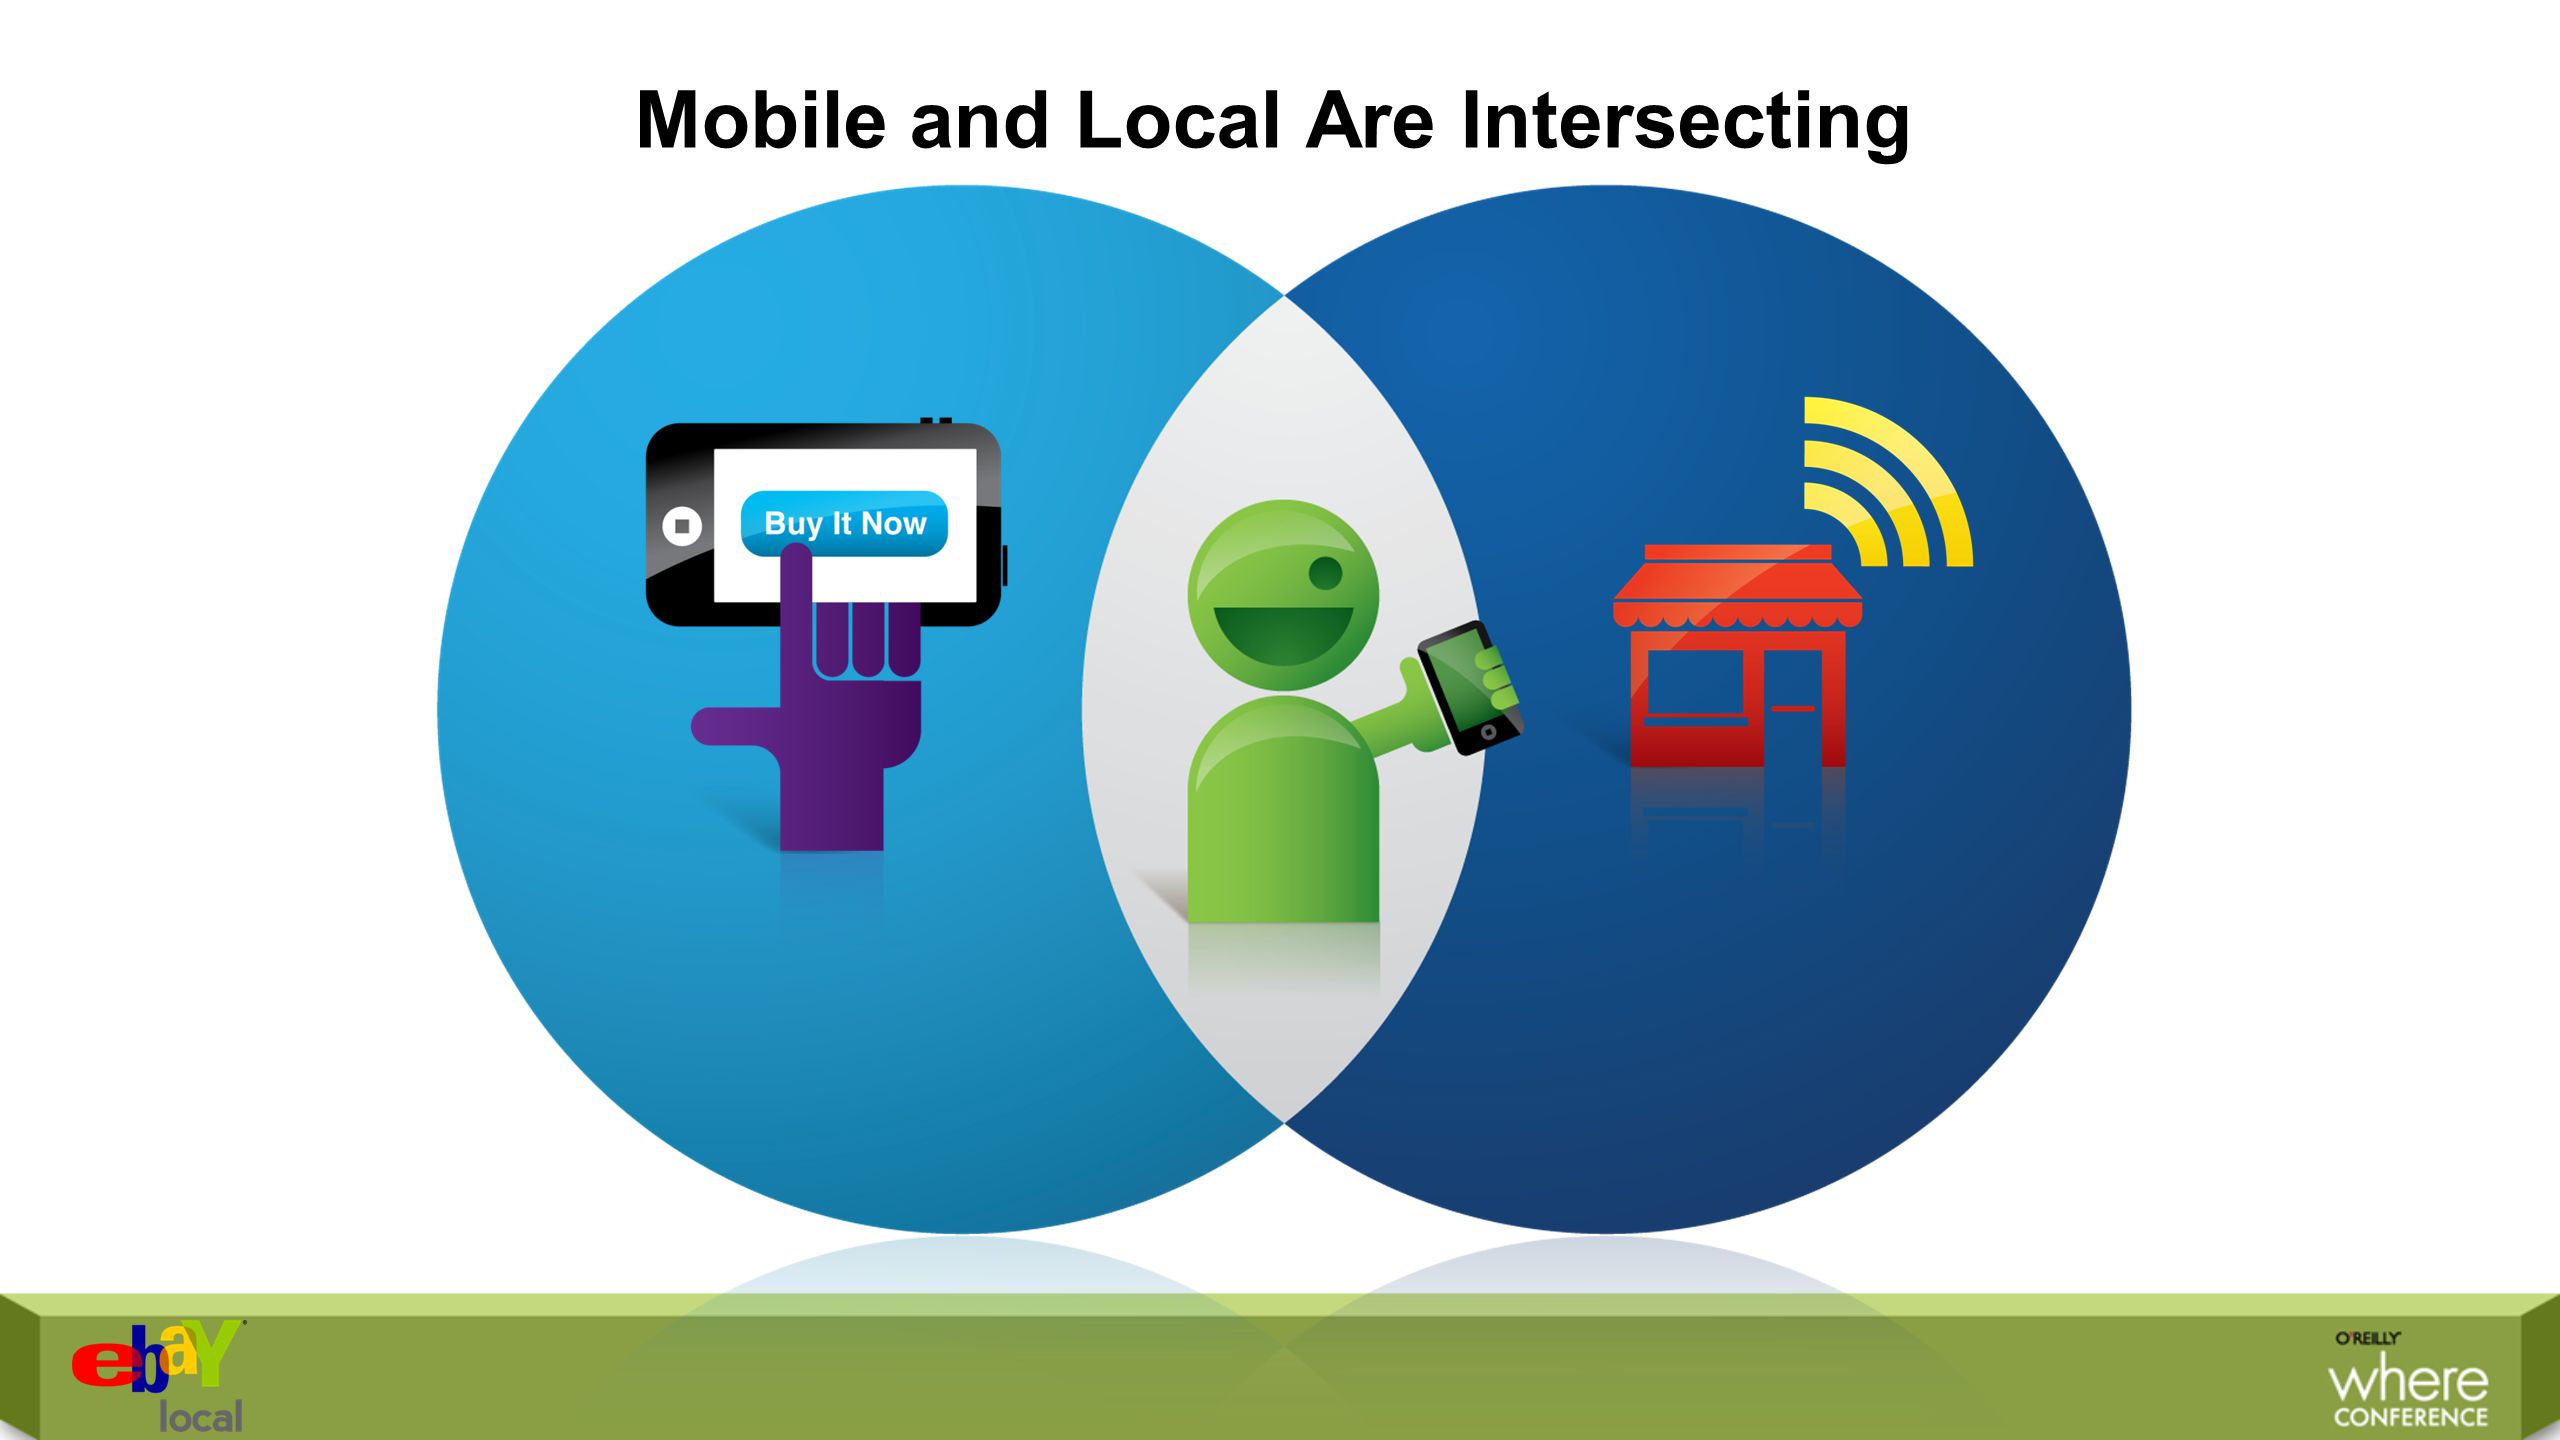 Mobile and Local Are Intersecting